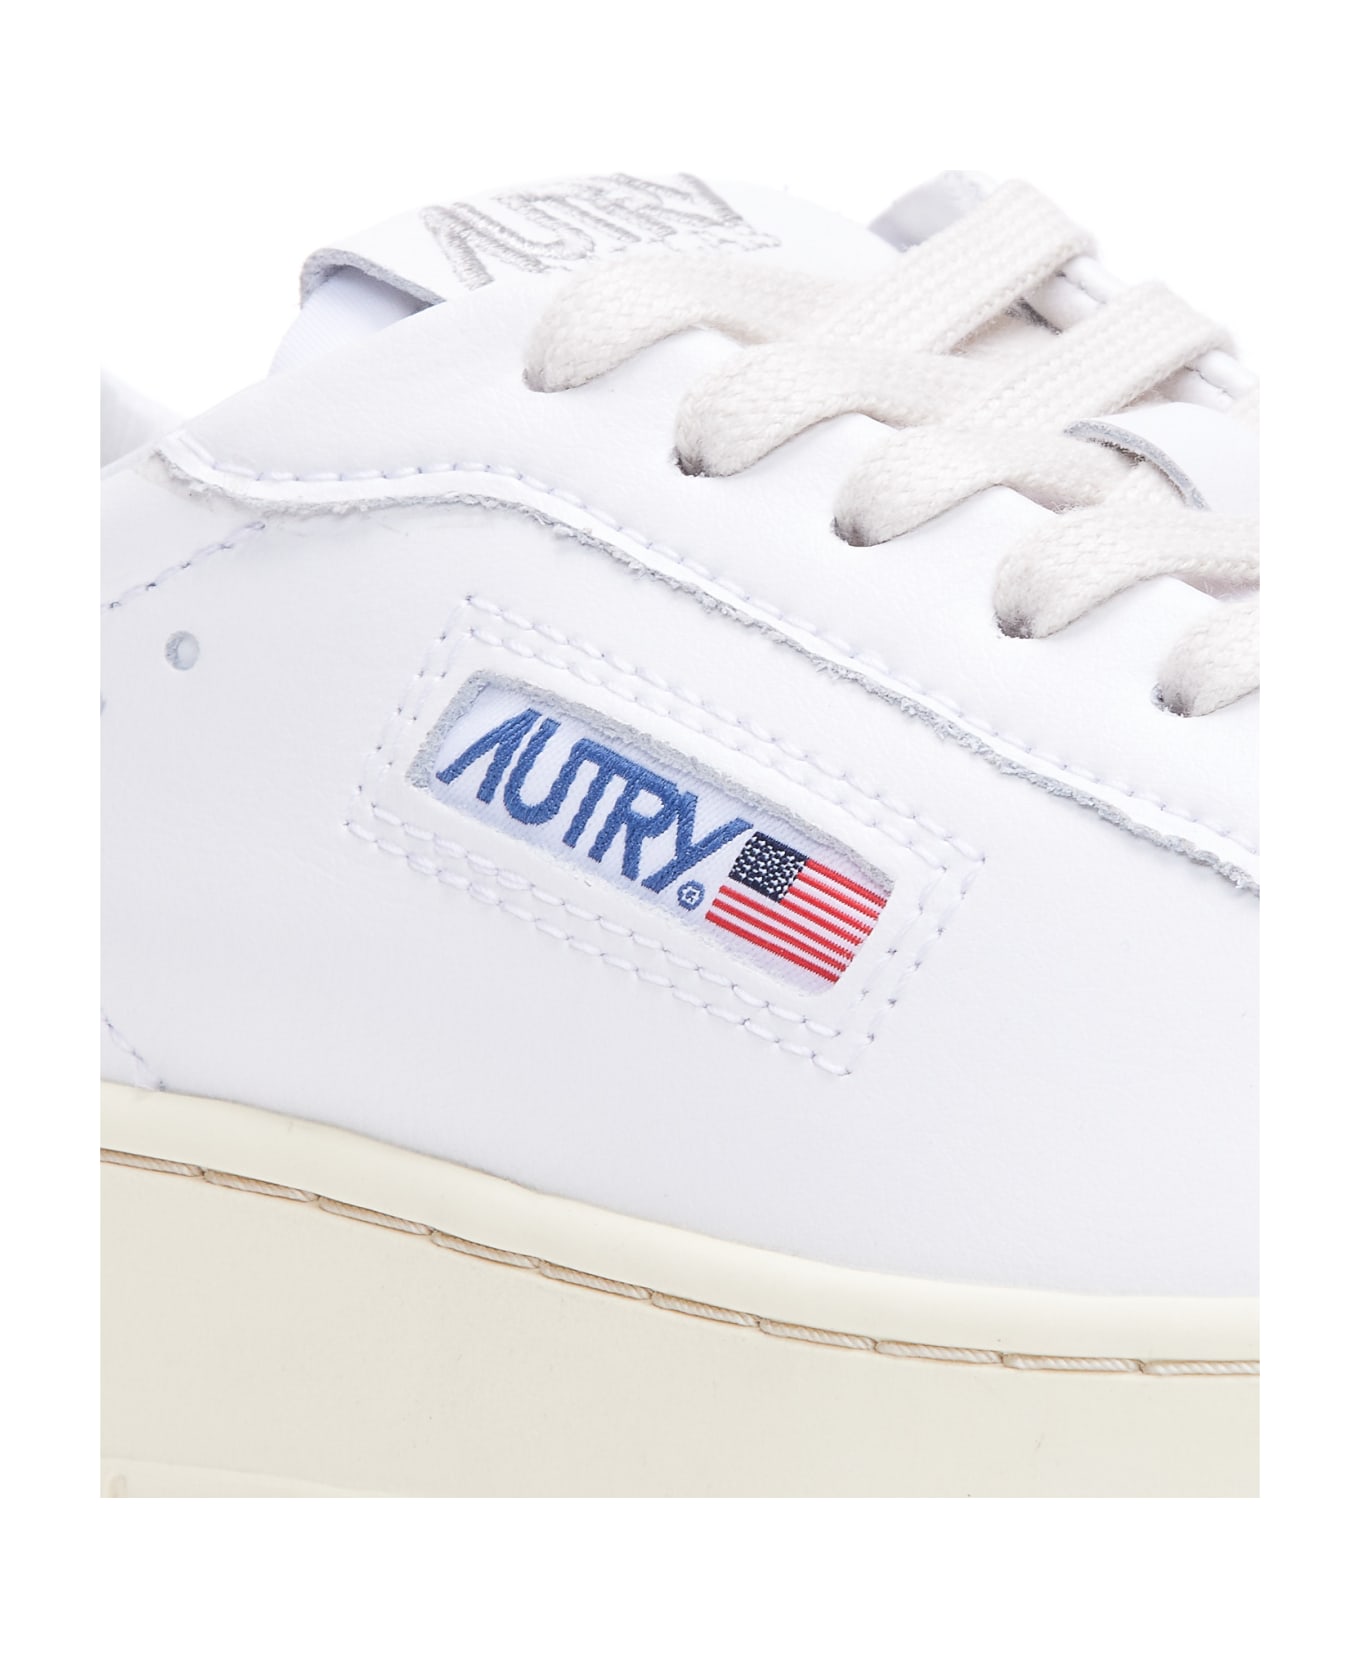 Autry Dallas Leather Sneakers - White スニーカー